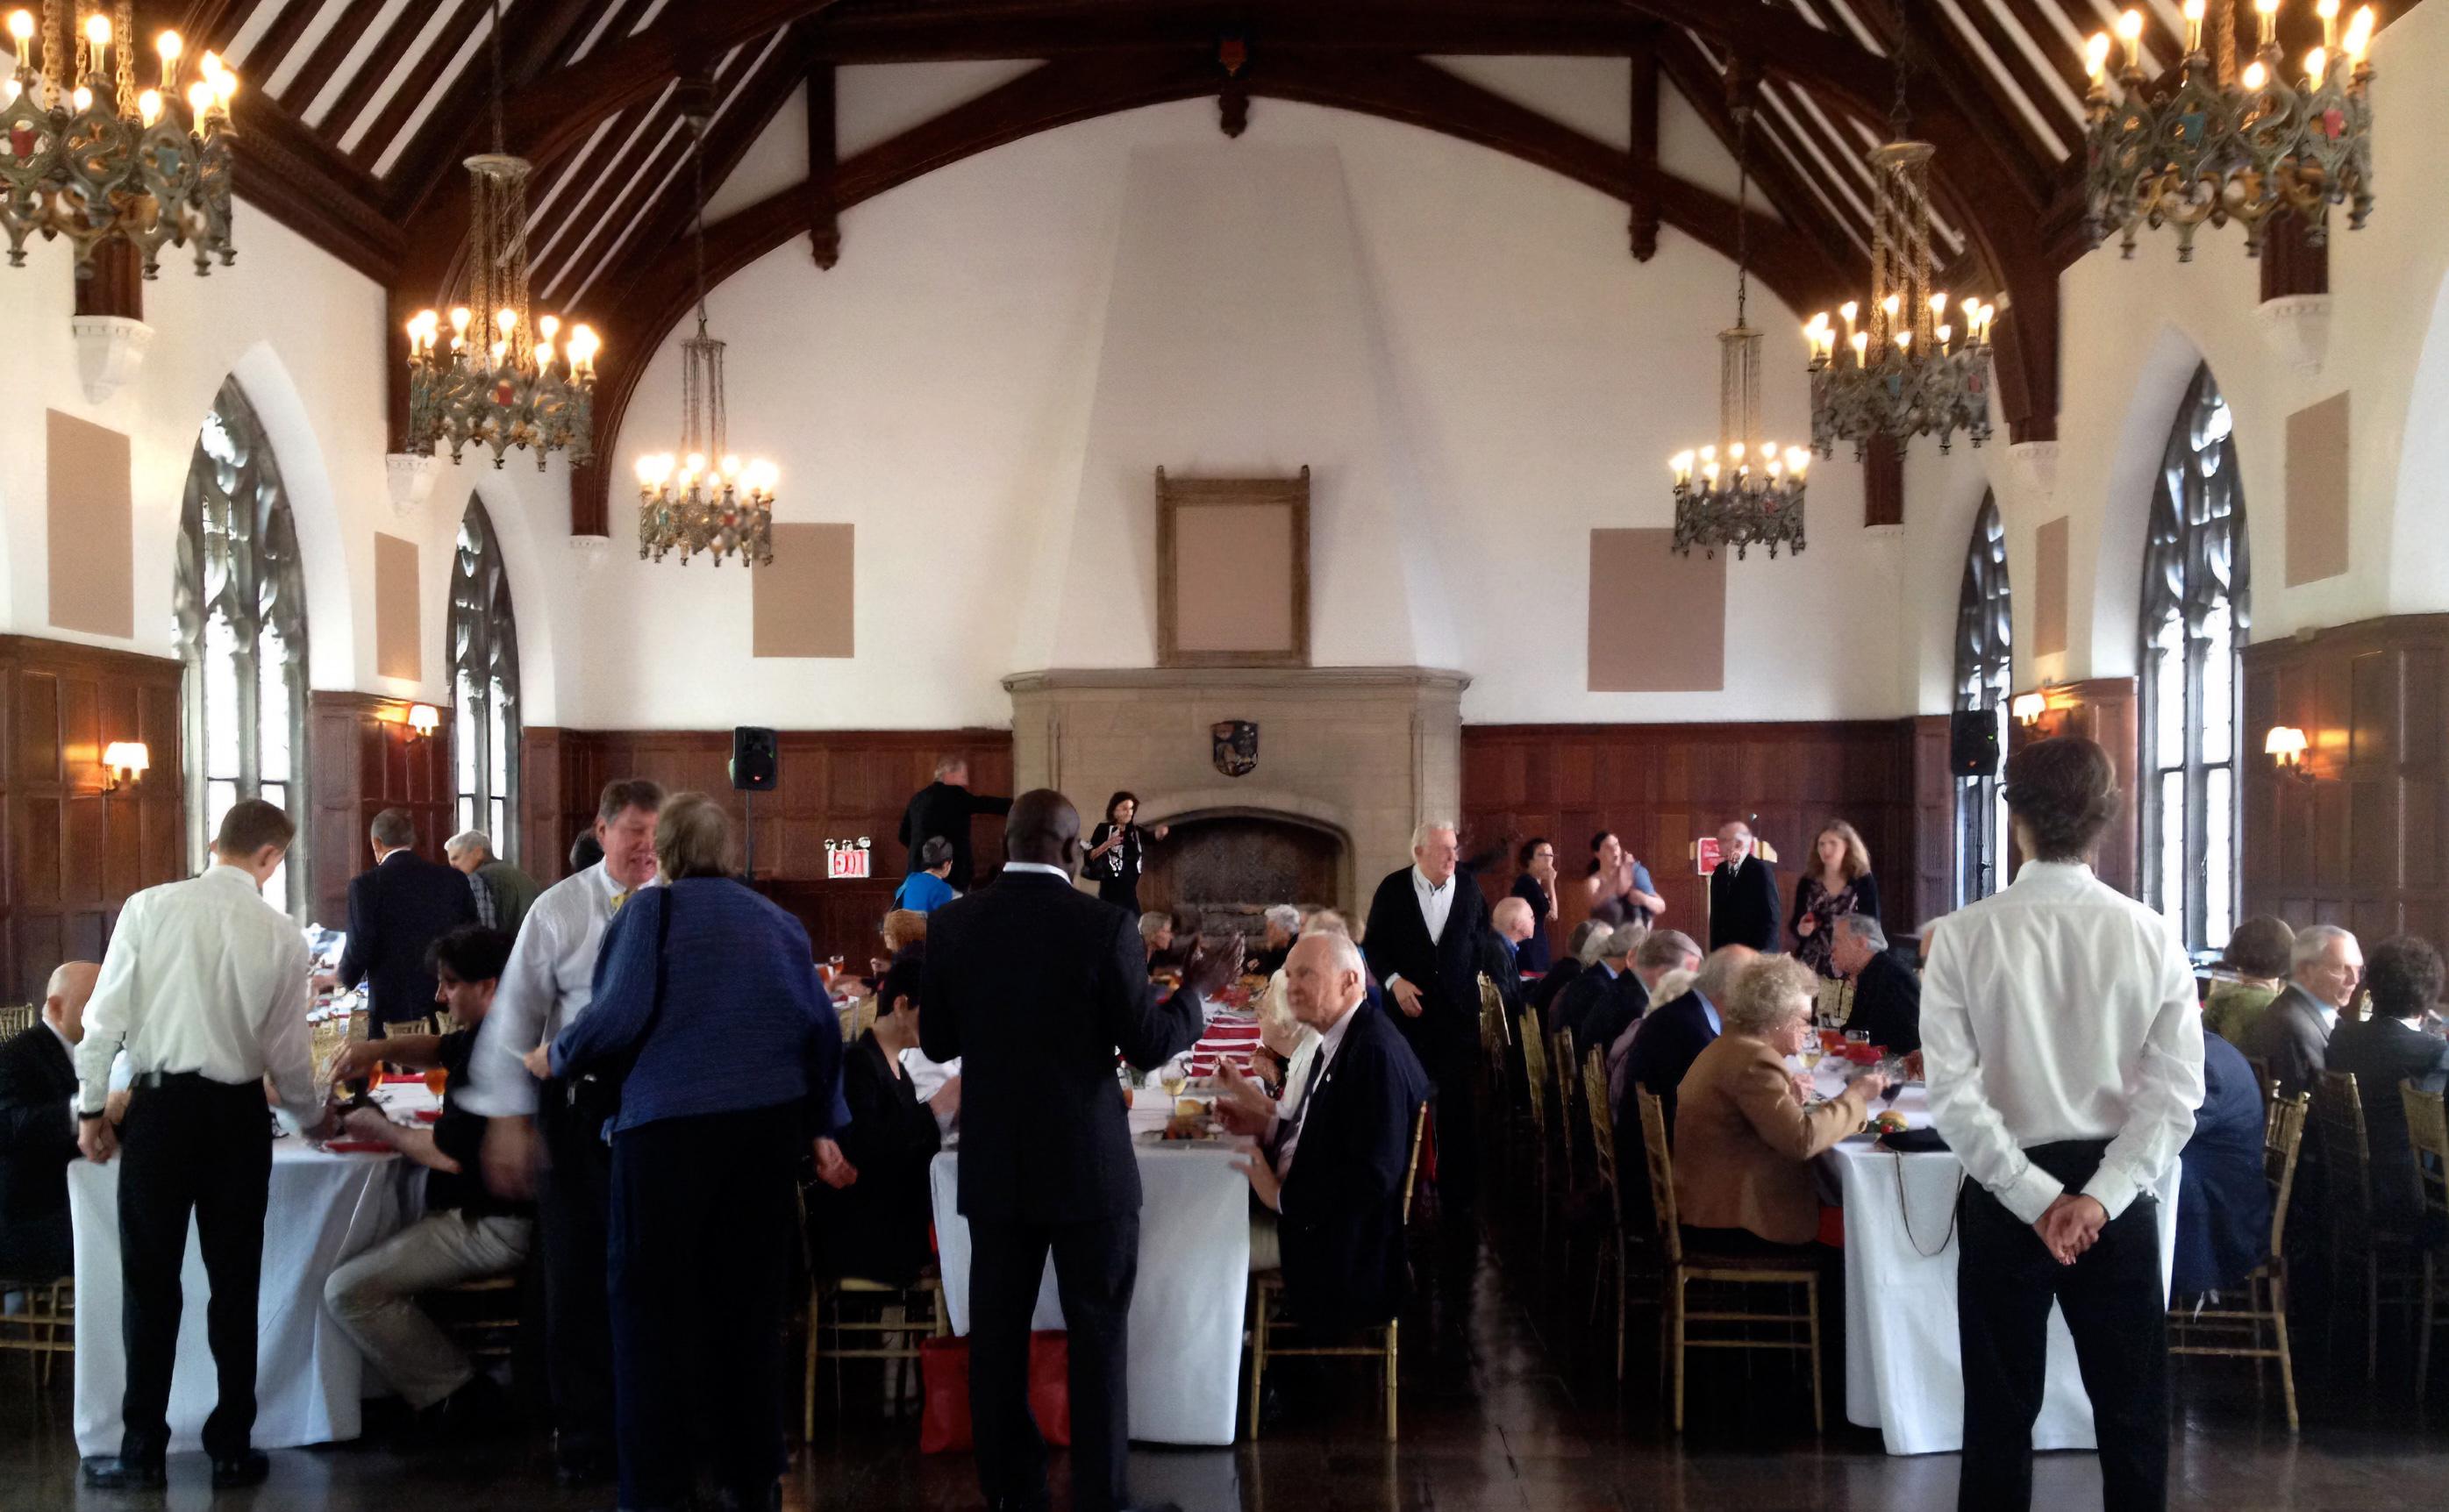 About Face during 175th anniversary luncheon, Refectory, Union Theological Seminary, New York, 2012